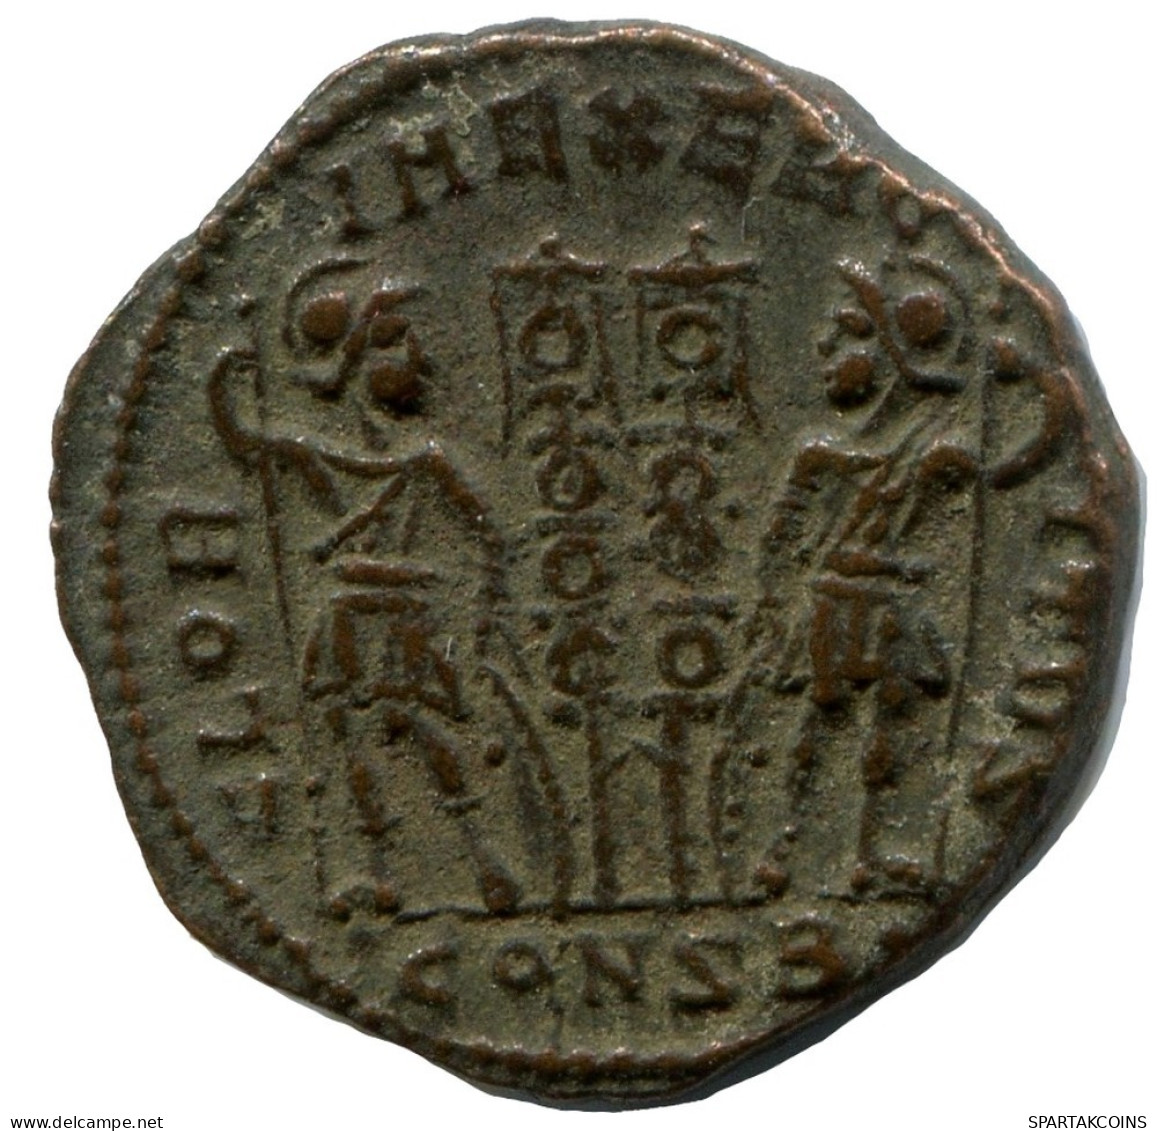 CONSTANTINE I MINTED IN CONSTANTINOPLE FOUND IN IHNASYAH HOARD #ANC10738.14.F.A - The Christian Empire (307 AD Tot 363 AD)